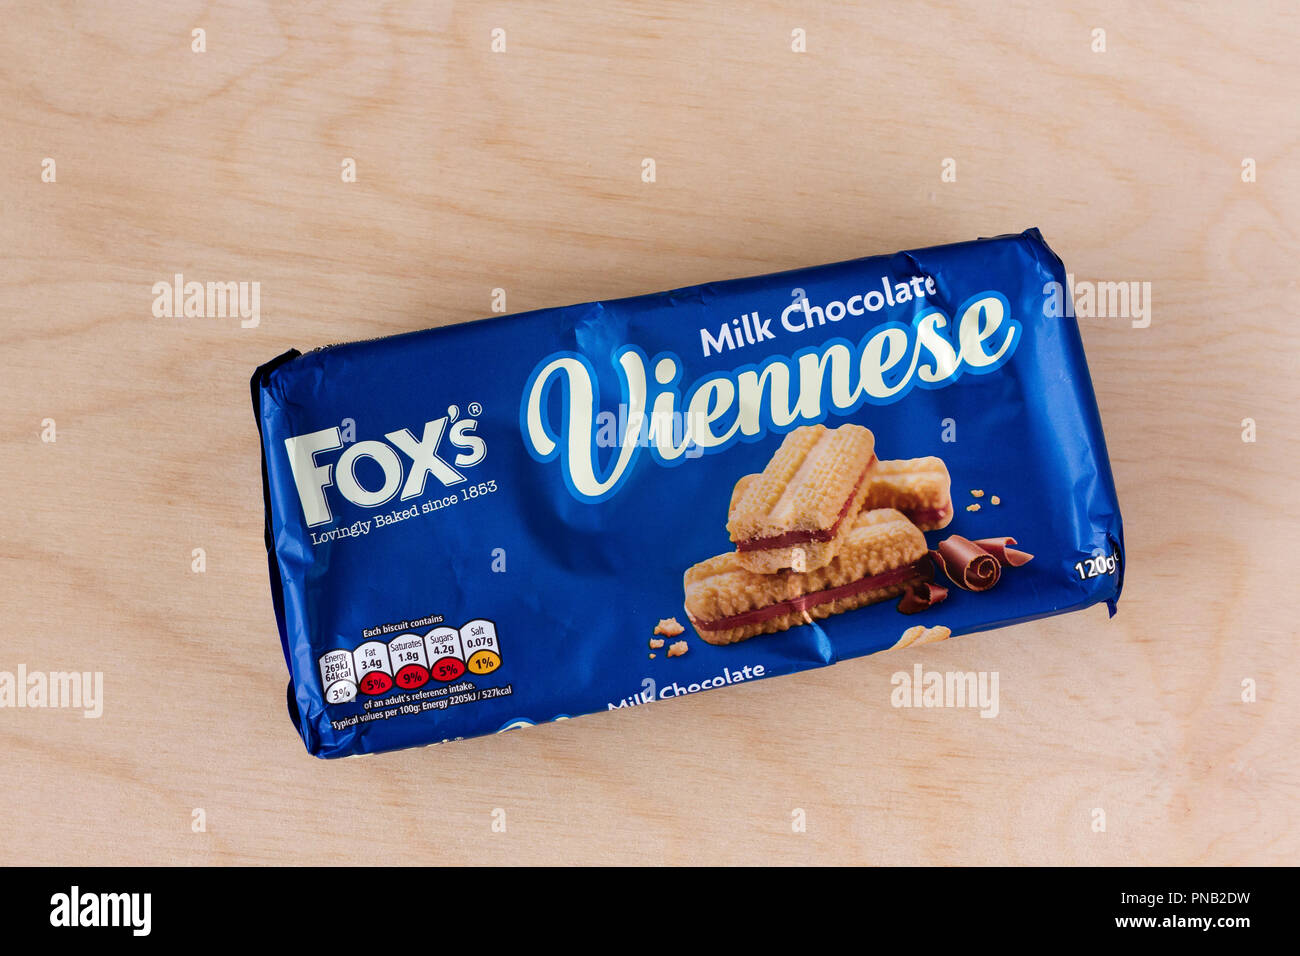 Foxs Viennese Milk Chocolate biscuits, unopened packet on a light wood background, United Kingdom Stock Photo